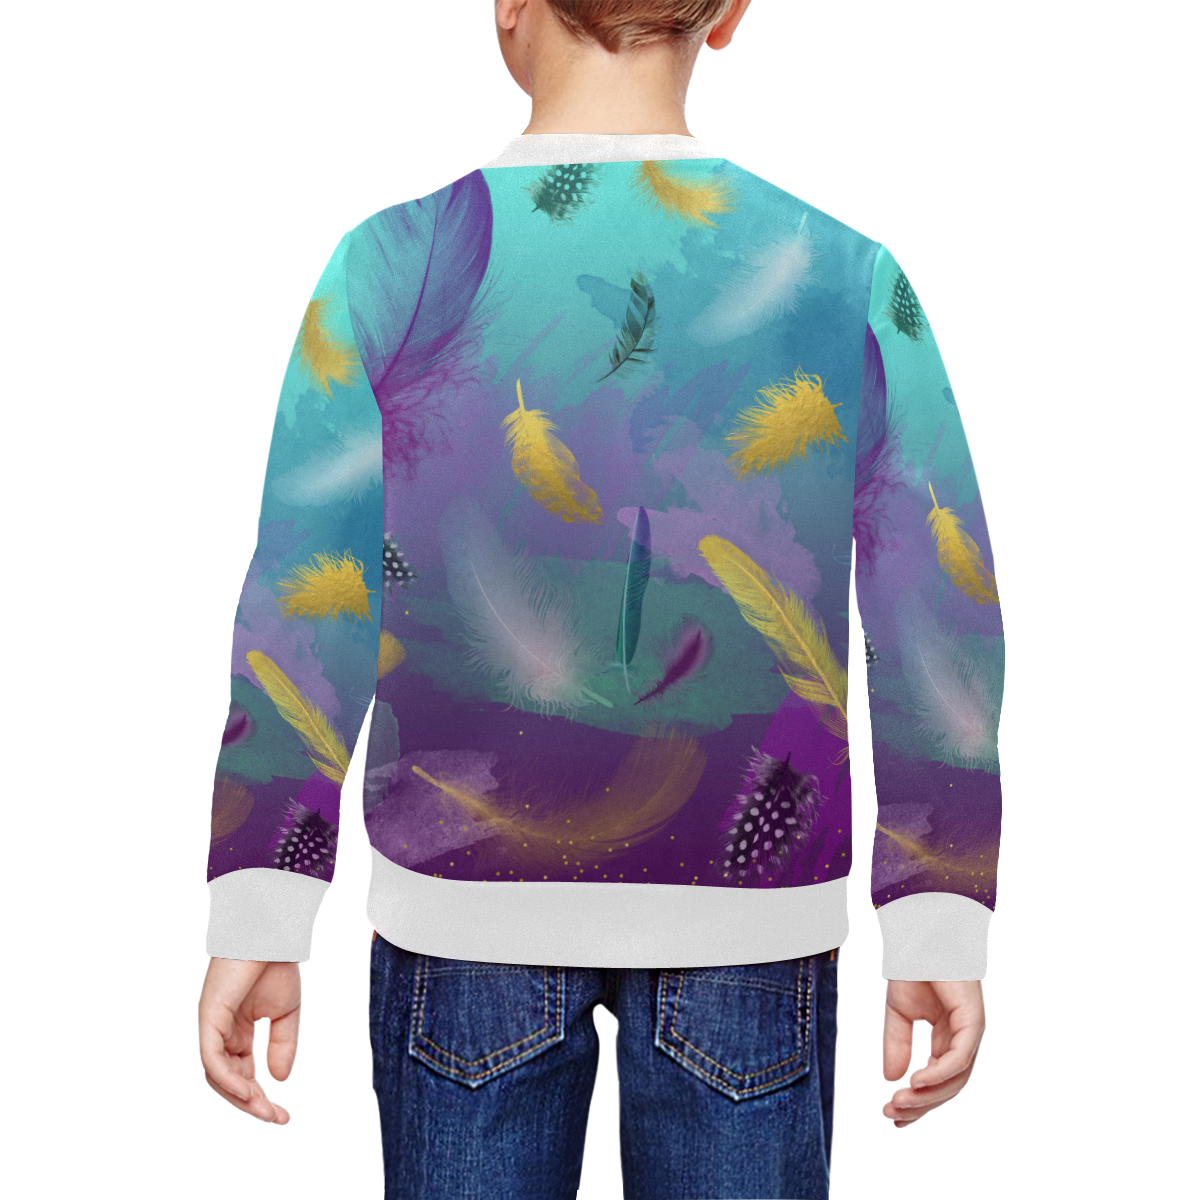 Dancing Feathers - Turquoise and Purple All Over Print Crewneck Sweatshirt for Kids (Model H29)